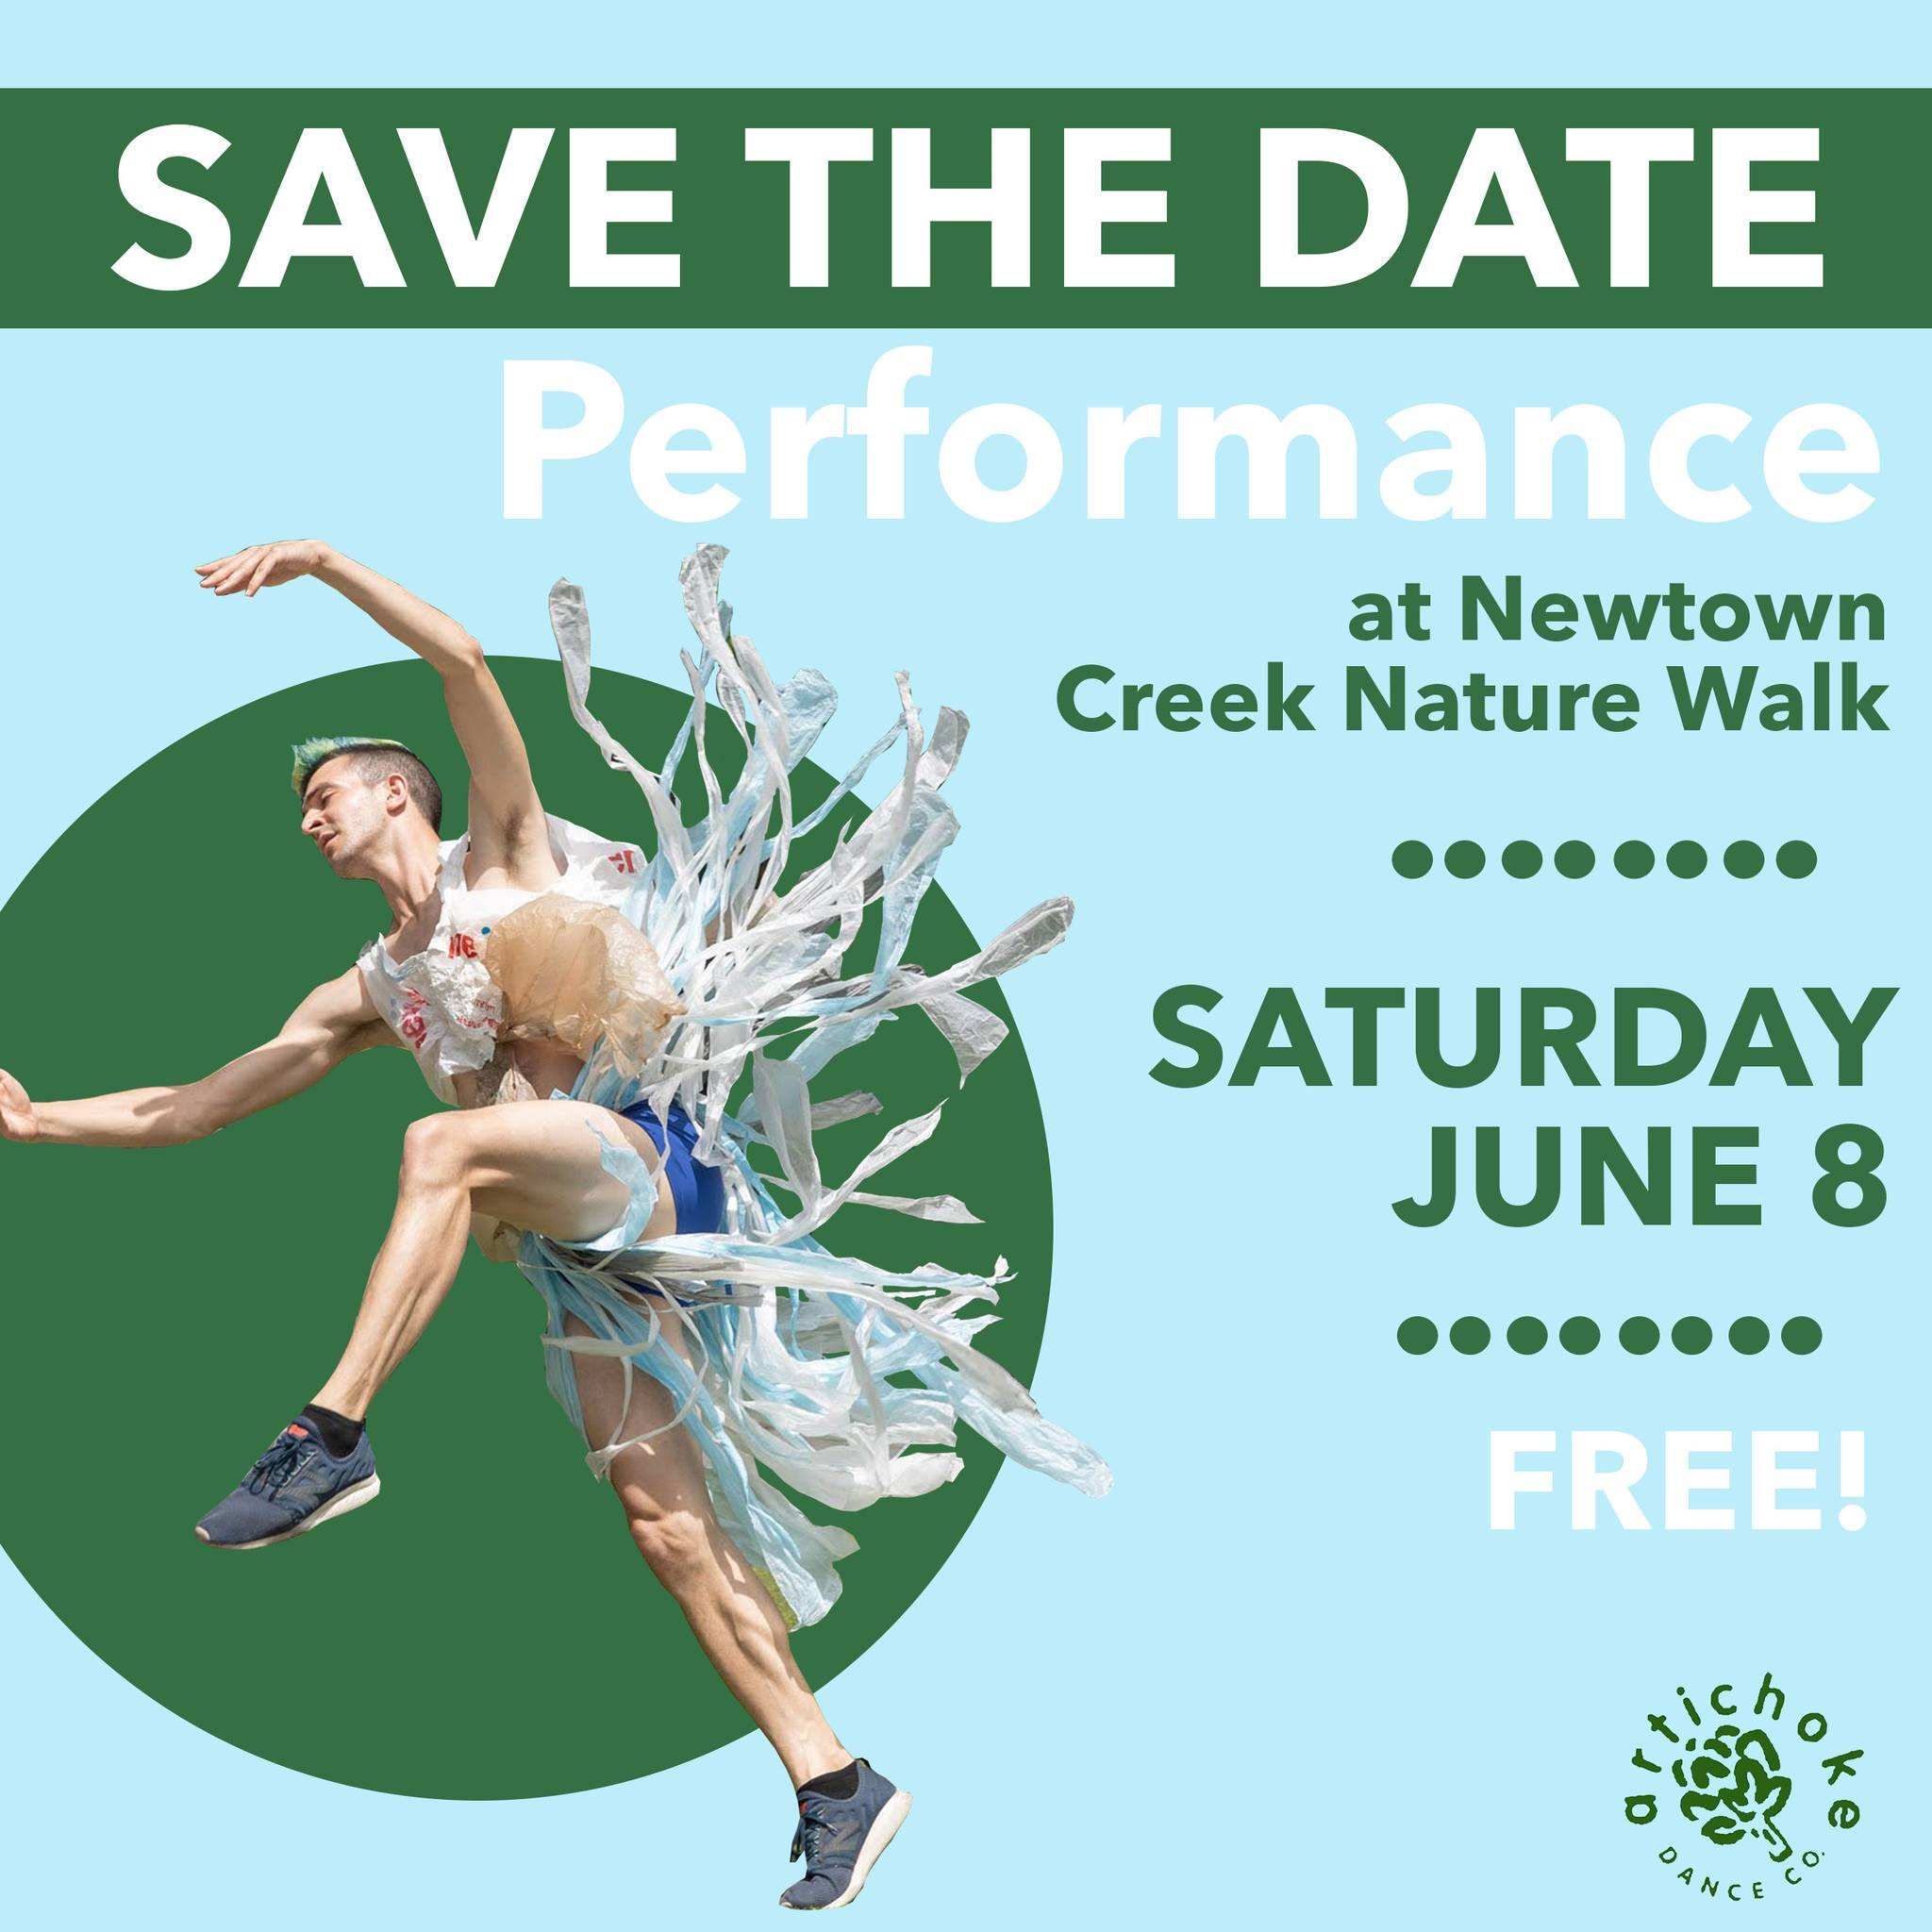 Save the date 📆 for an upcoming performance by Artichoke Dance Company at the Newtown Creek Nature Walk! 🌍 

Taking place on Saturday, June 8 this performance will be FREE and open to the public. 

We will be announcing a starting time and location